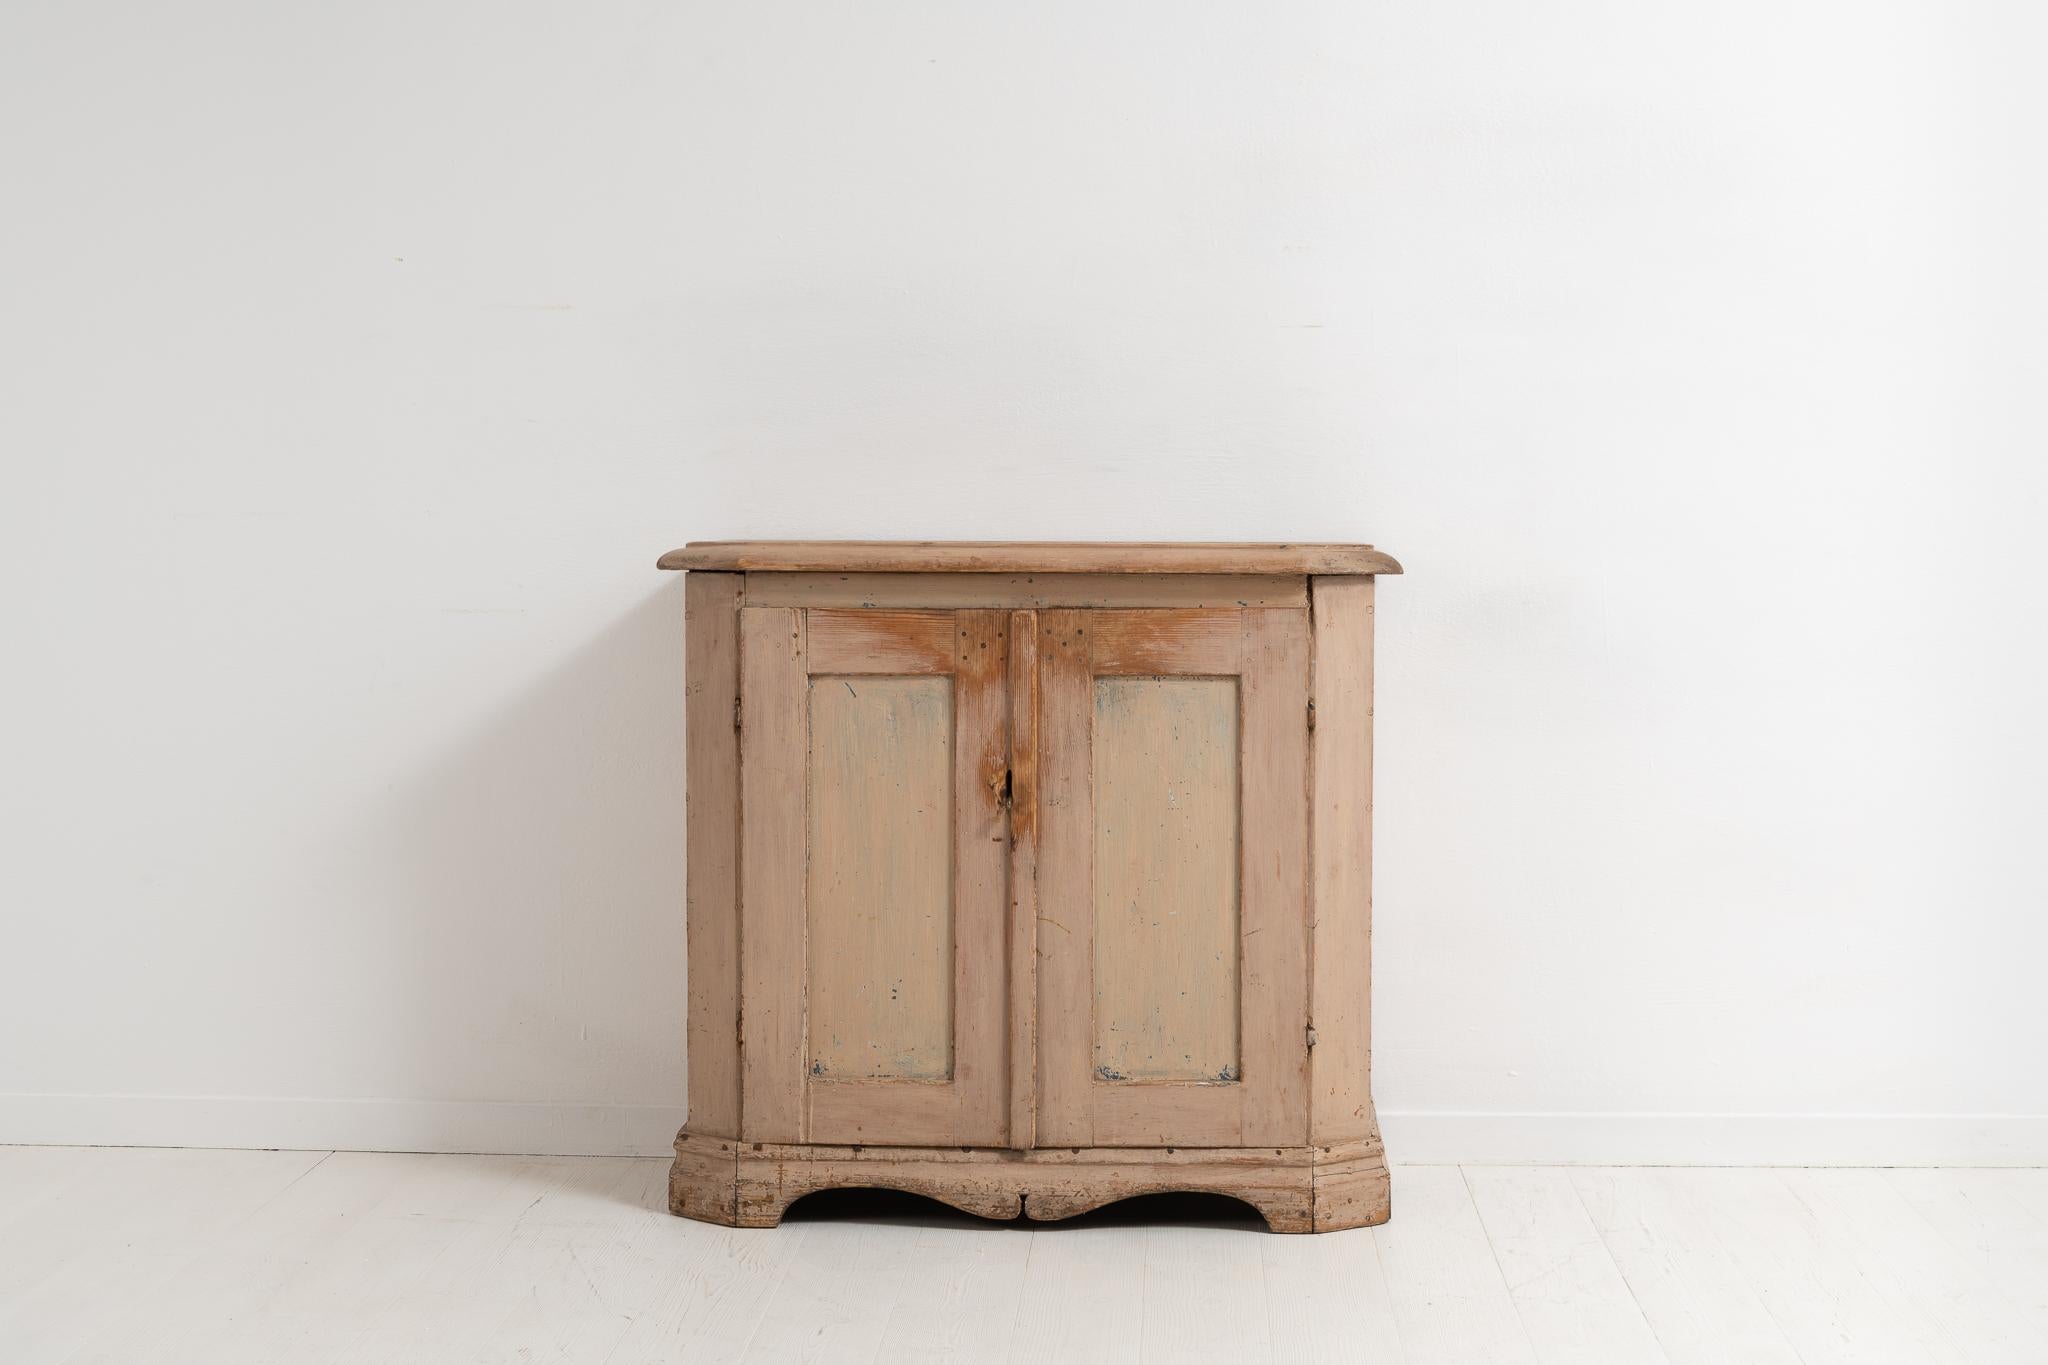 Small Late 18th Century Swedish Pine Country Folk Art Sideboard In Good Condition For Sale In Kramfors, SE